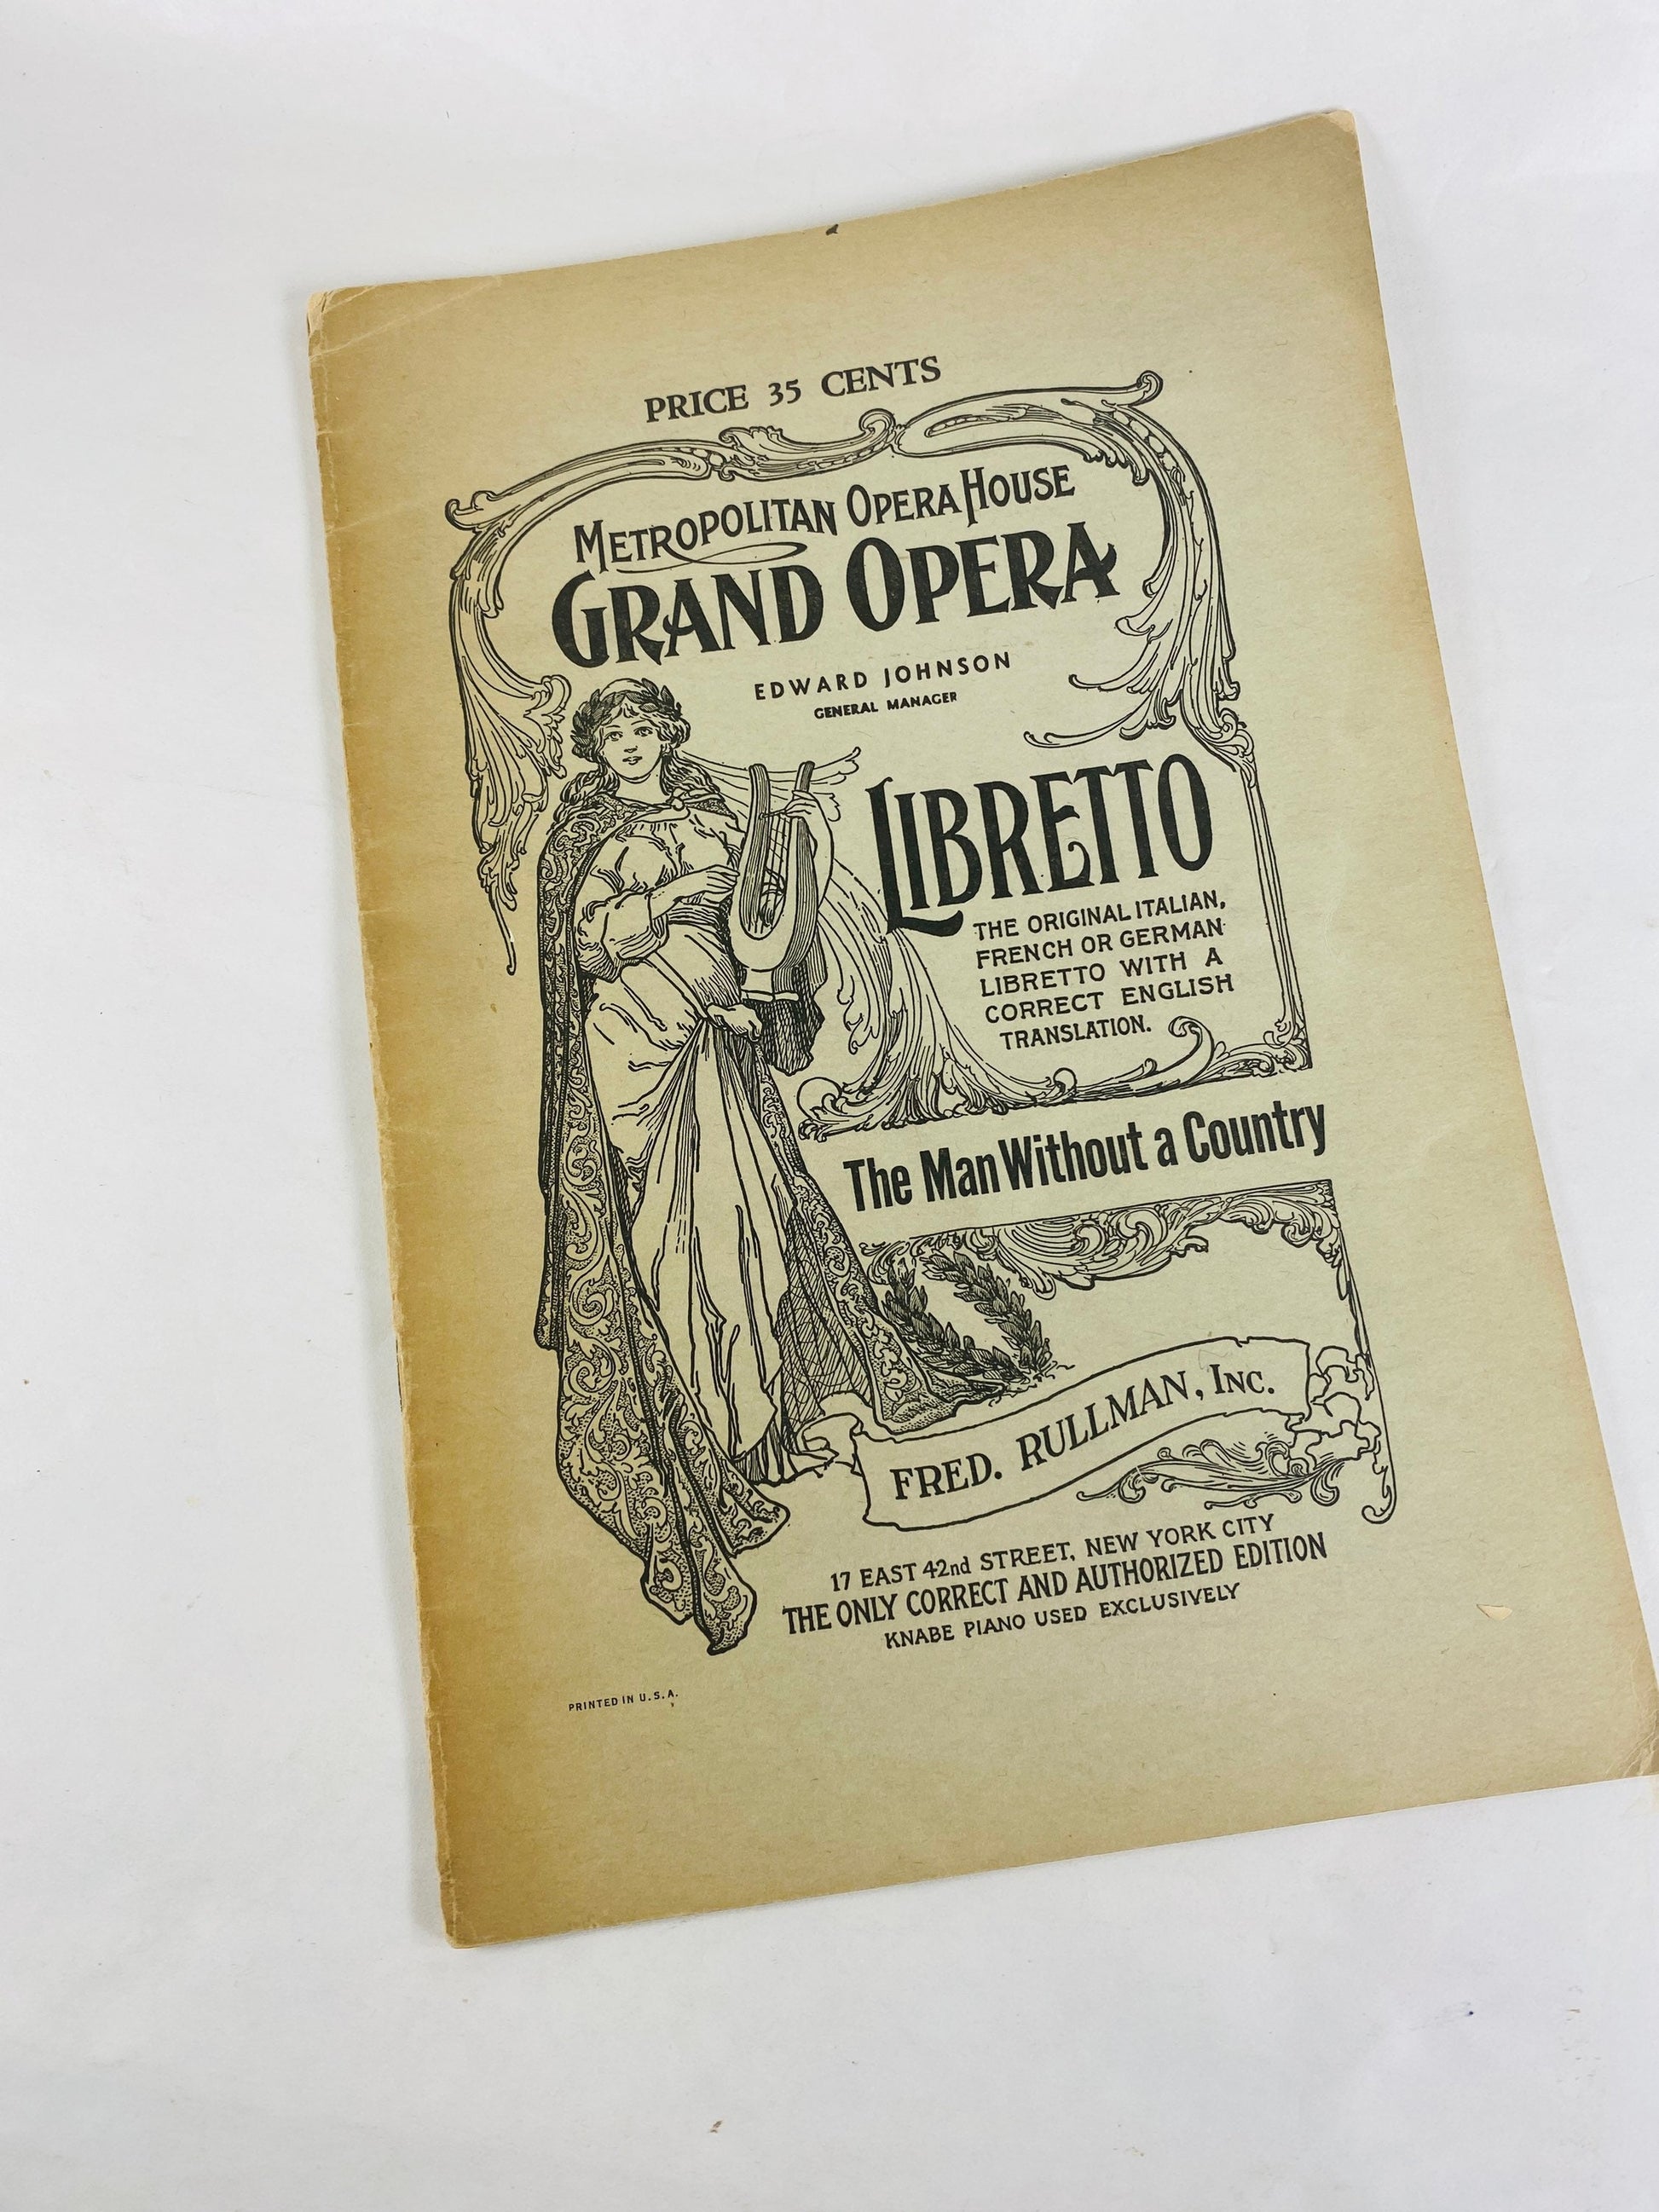 1910 Metropolitan Grand Opera House New York City, NY. OFFICIAL lot of 5 libretto program booklets. Marouf Aida Man Without a Country Mignon